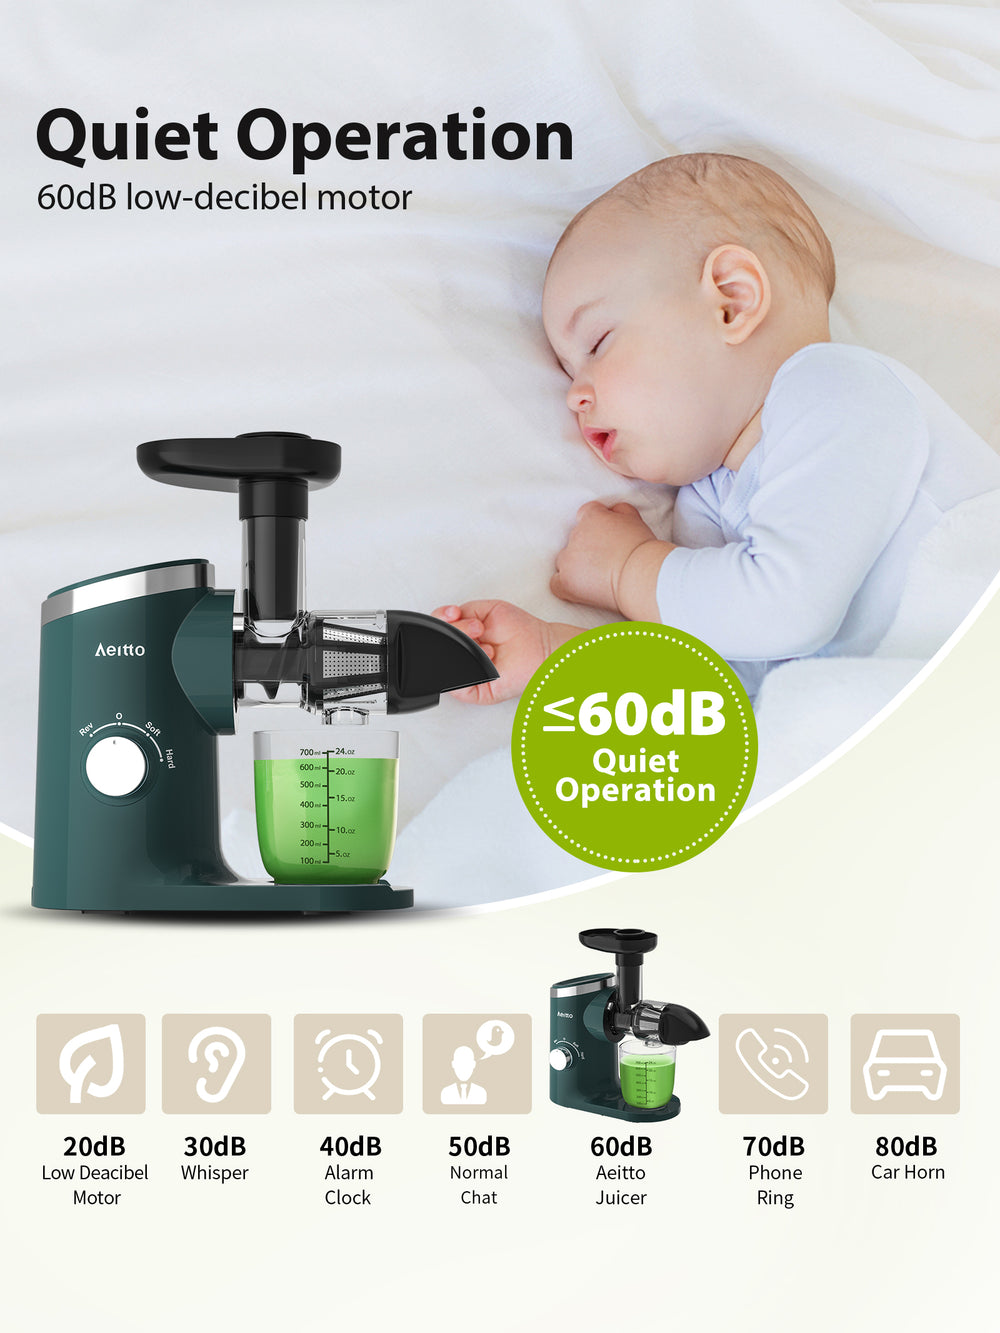 Aeitto Masticating Juicer with Two Speed Modes GREEN